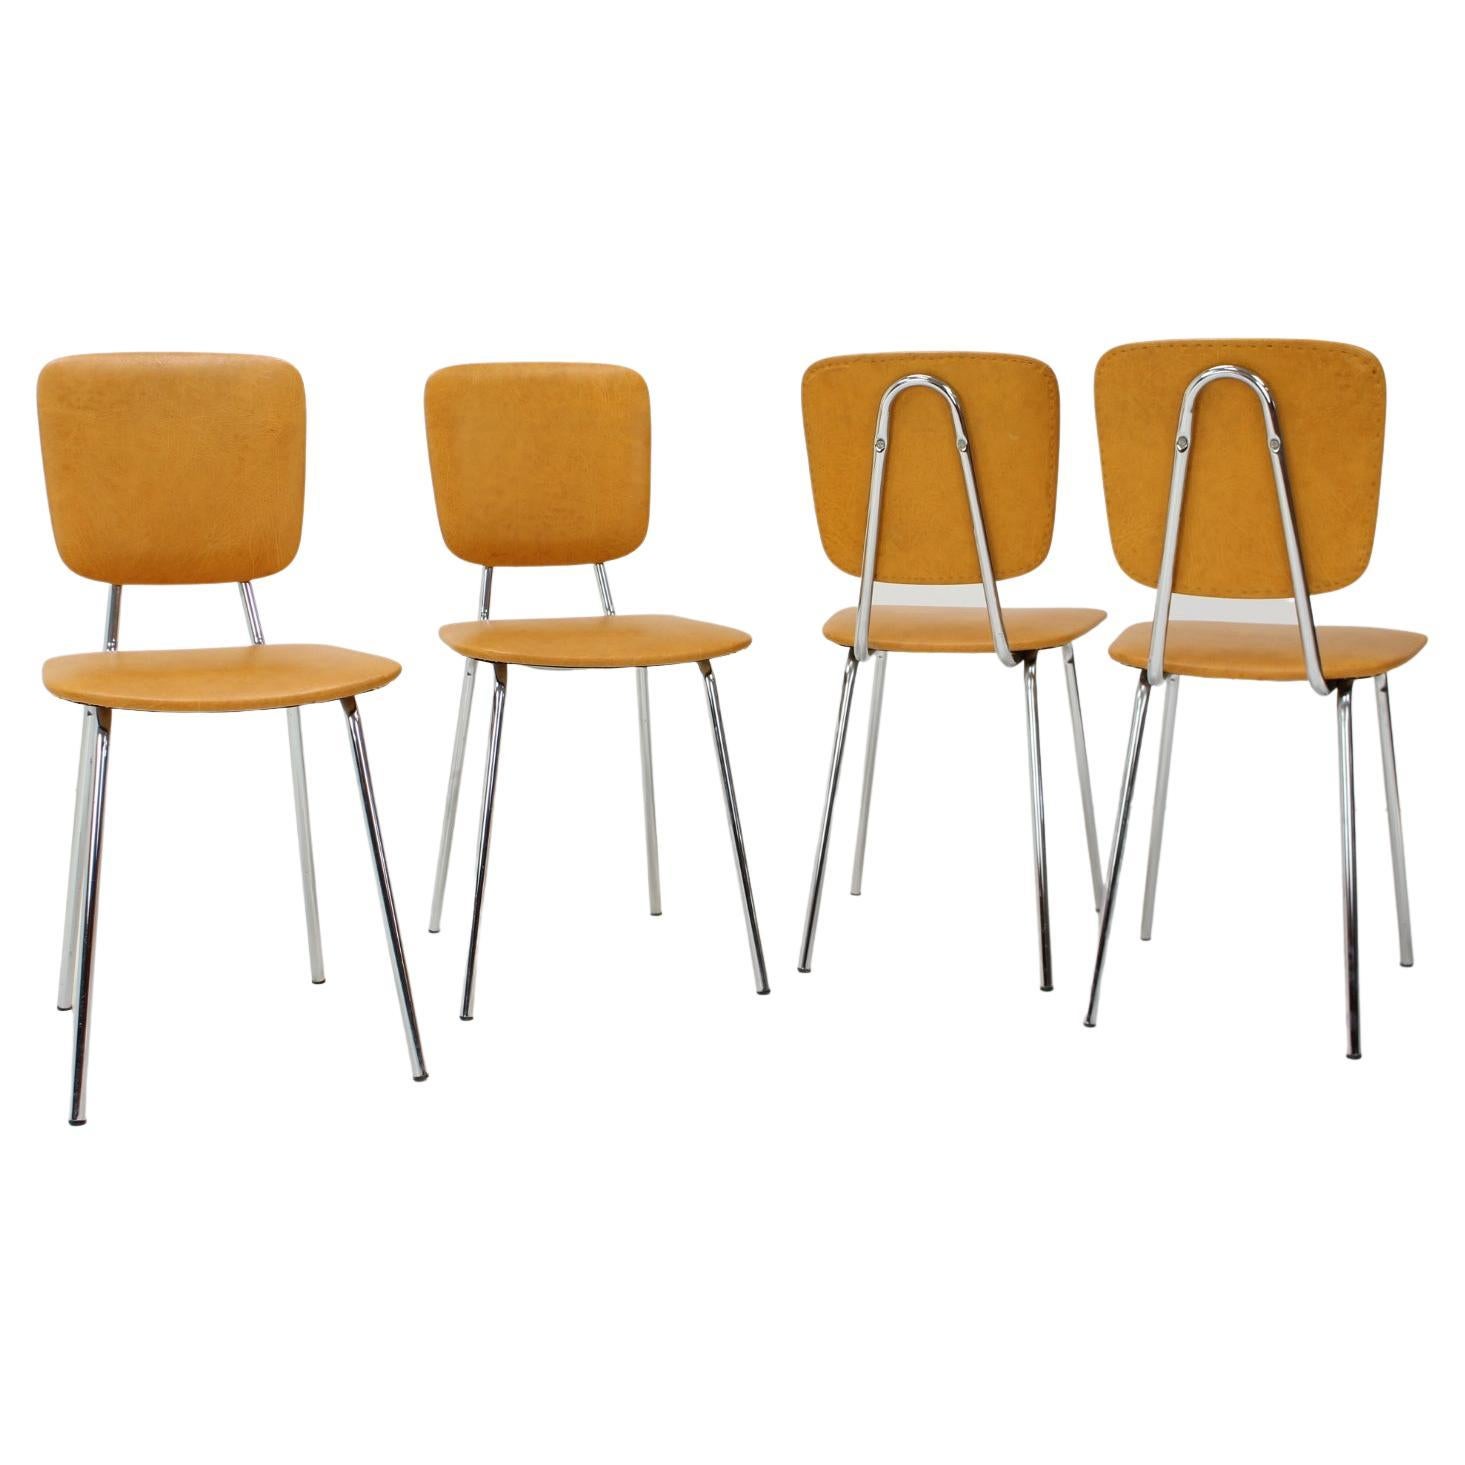 1970s Set of Four Dining Chairs, Czechoslovakia